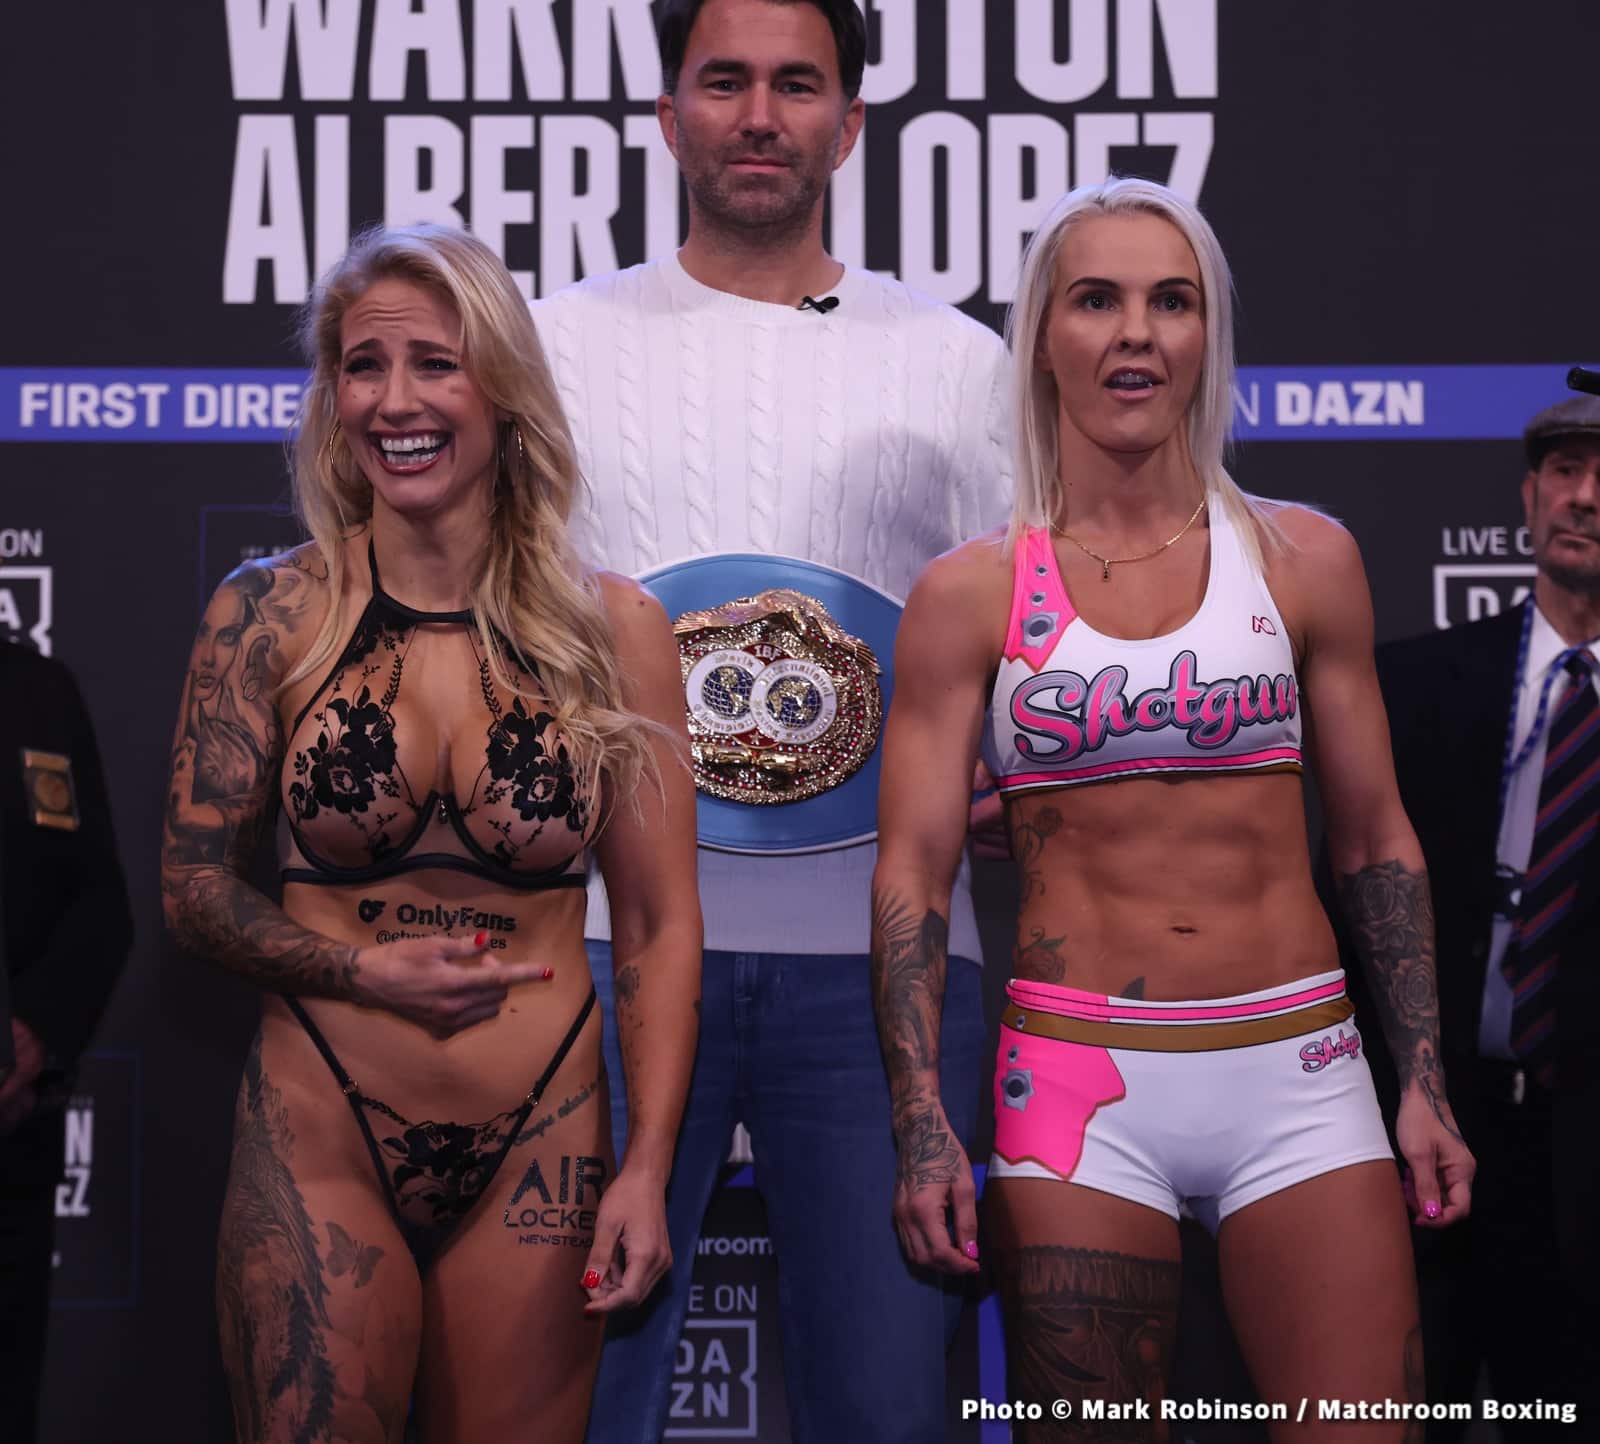 Image: Warrington 125 1/4 vs. Lopez 124 1/4 - weigh-in results